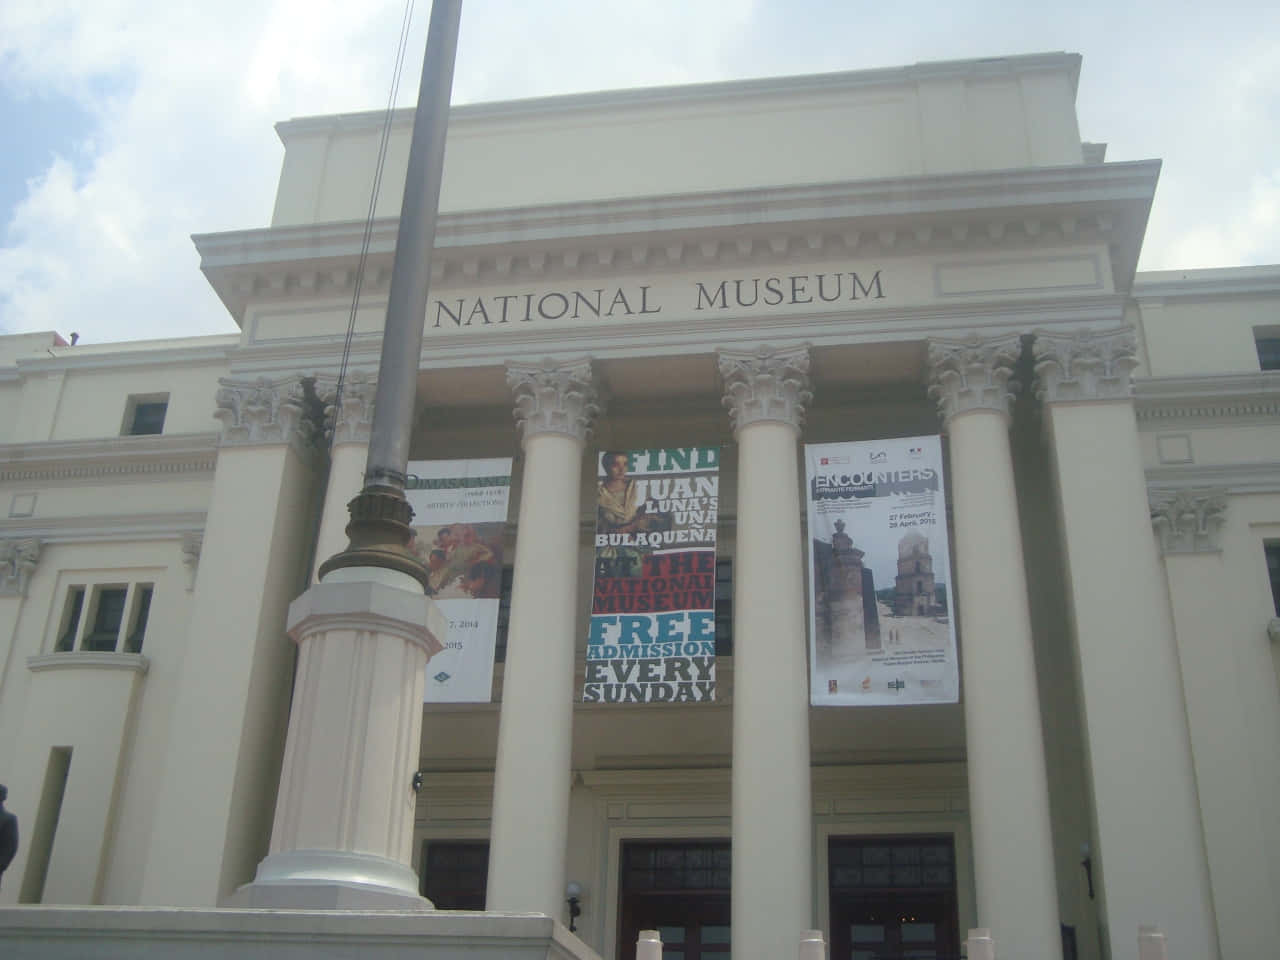 A Large Building With Columns And A Flag